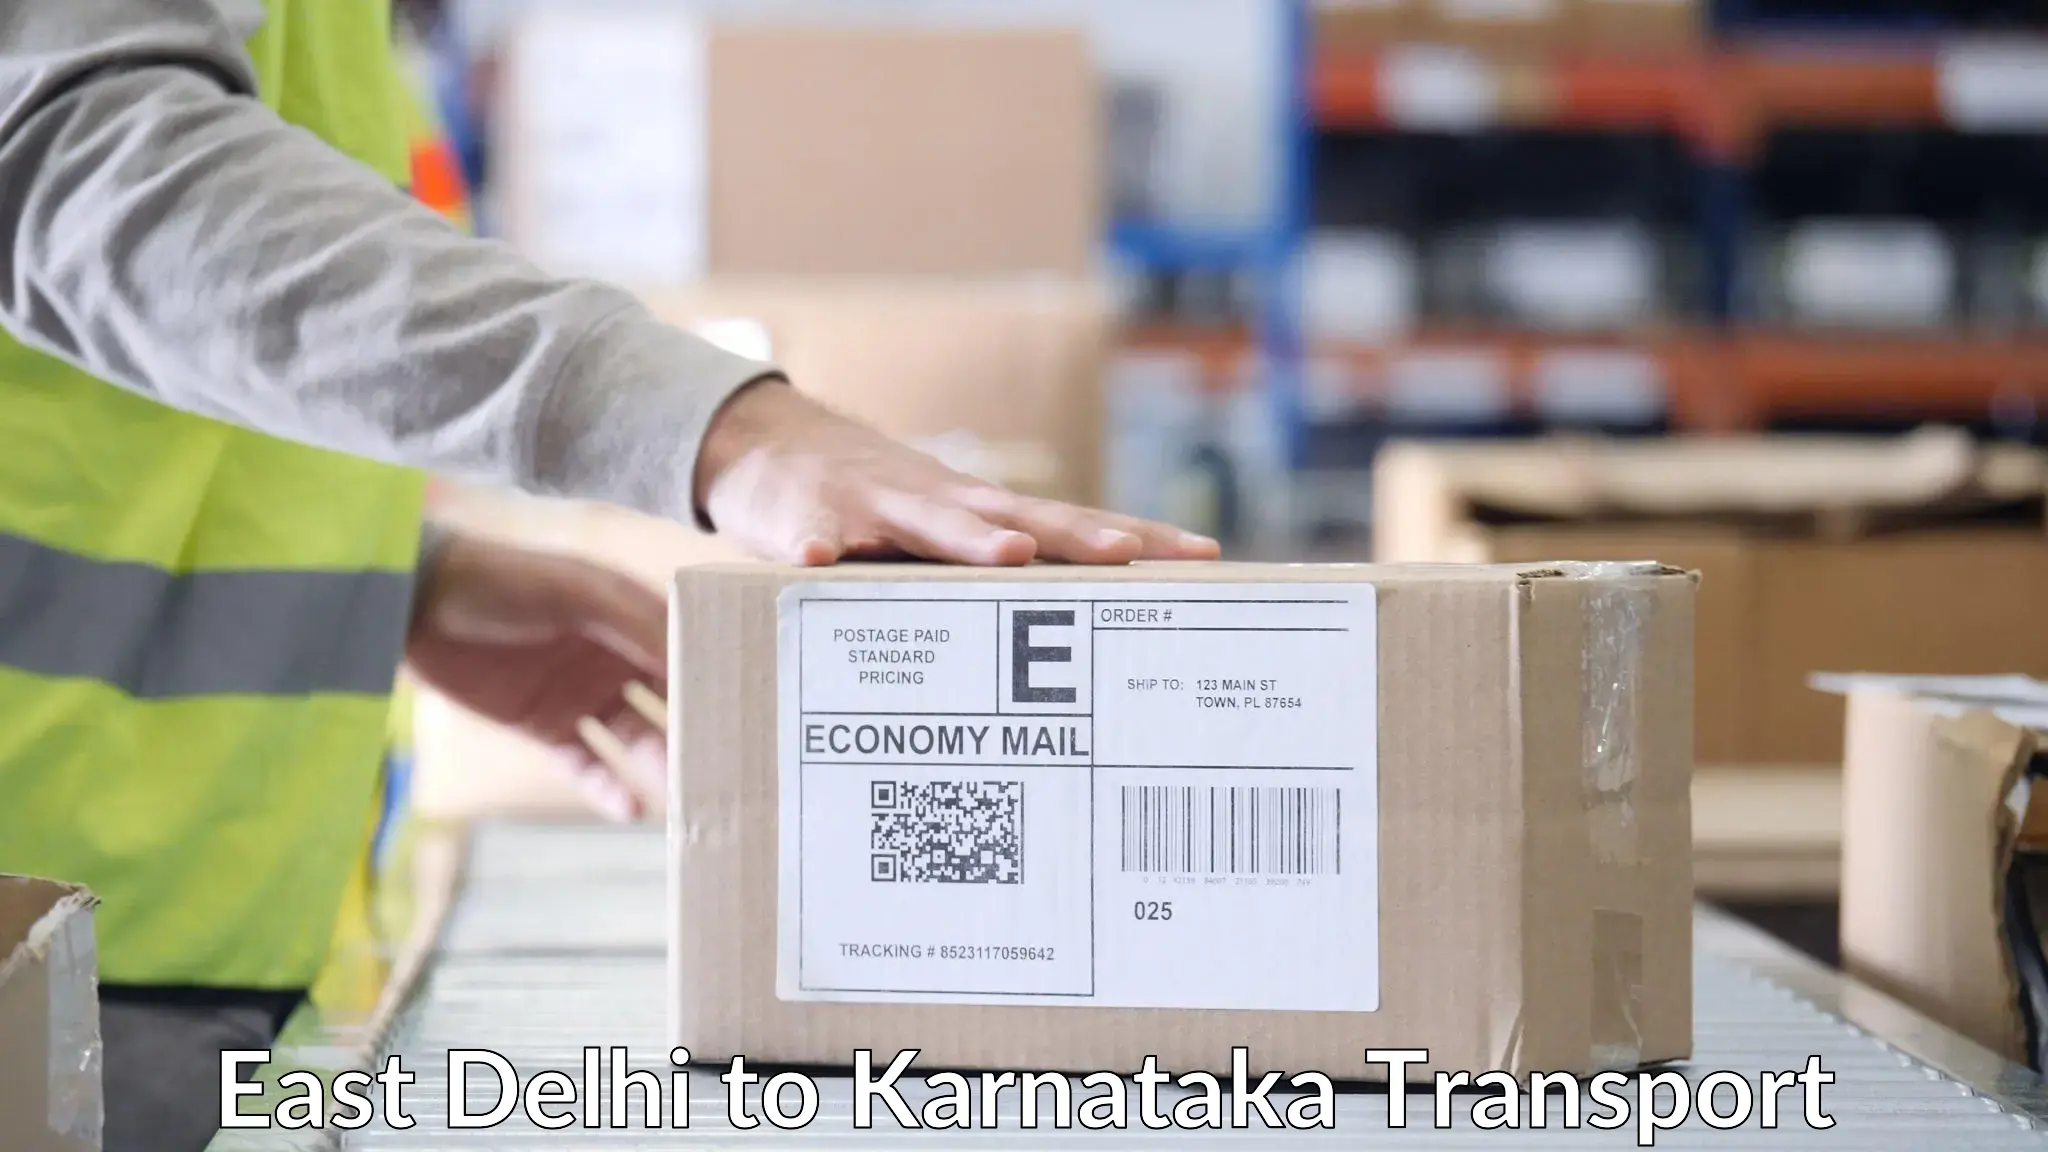 Commercial transport service East Delhi to Bailhongal